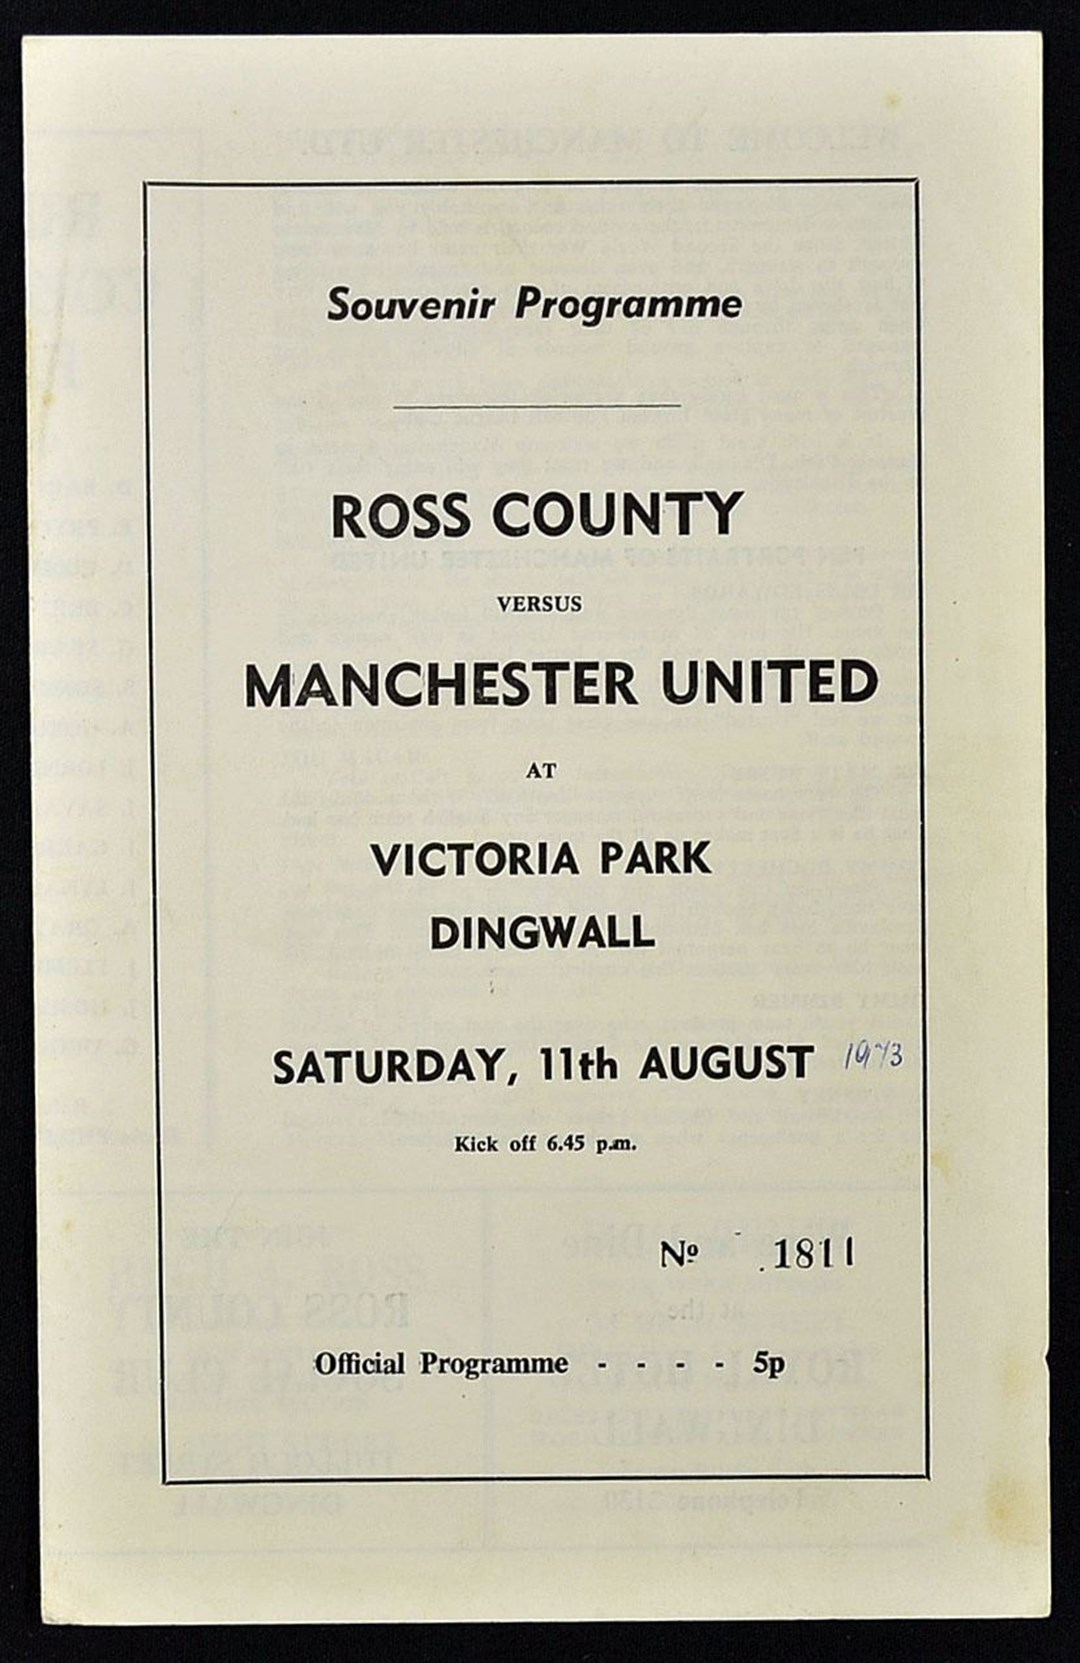 The programme from Ross County v Manchester United from August 11, 1973.